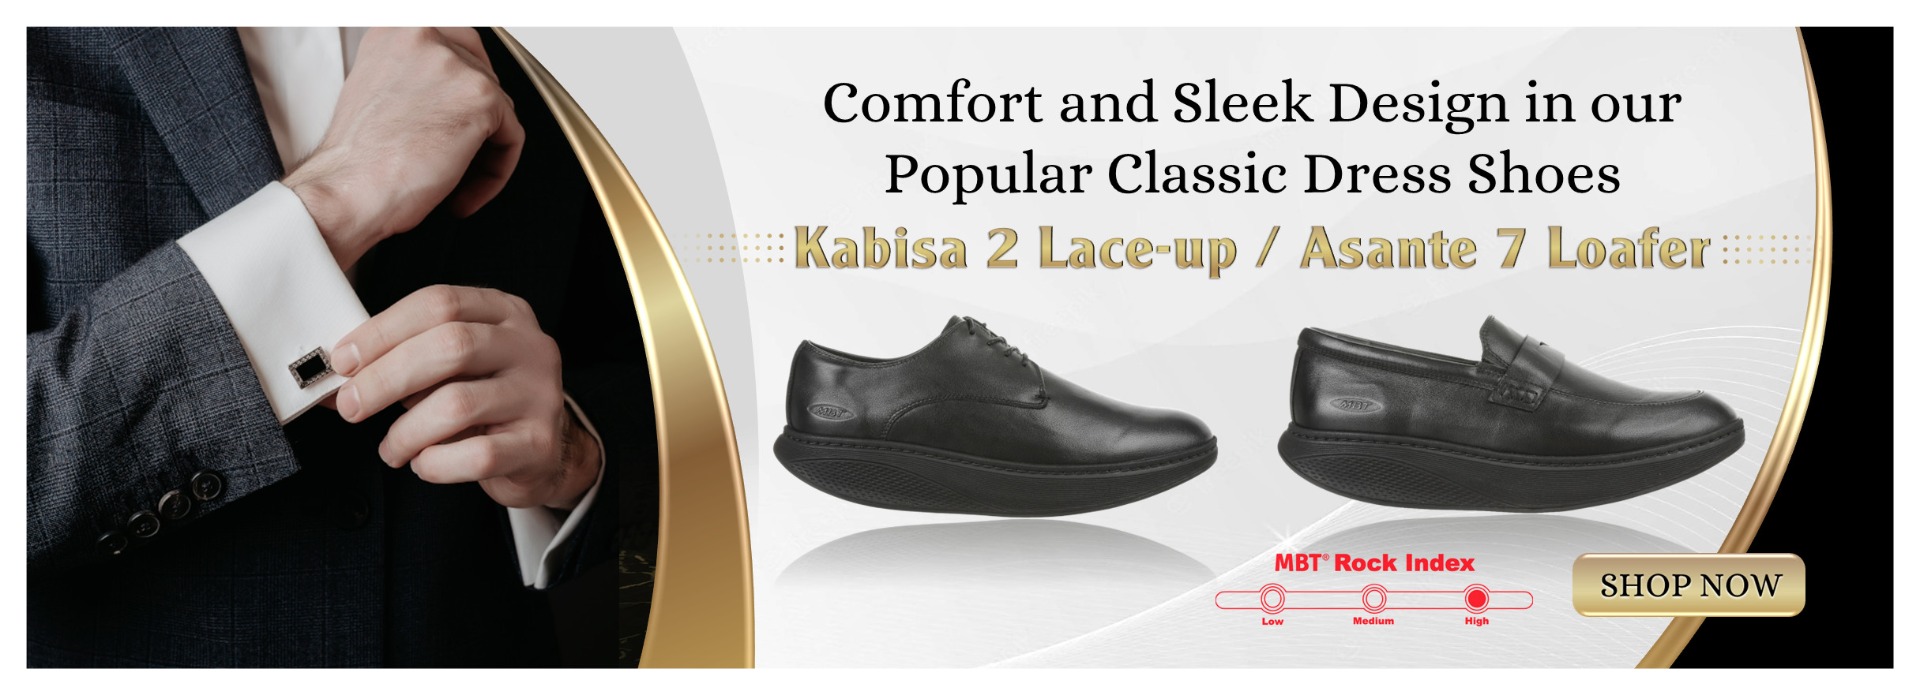 Comfort and Sleek Design in our Popular Classic Dress Shoes